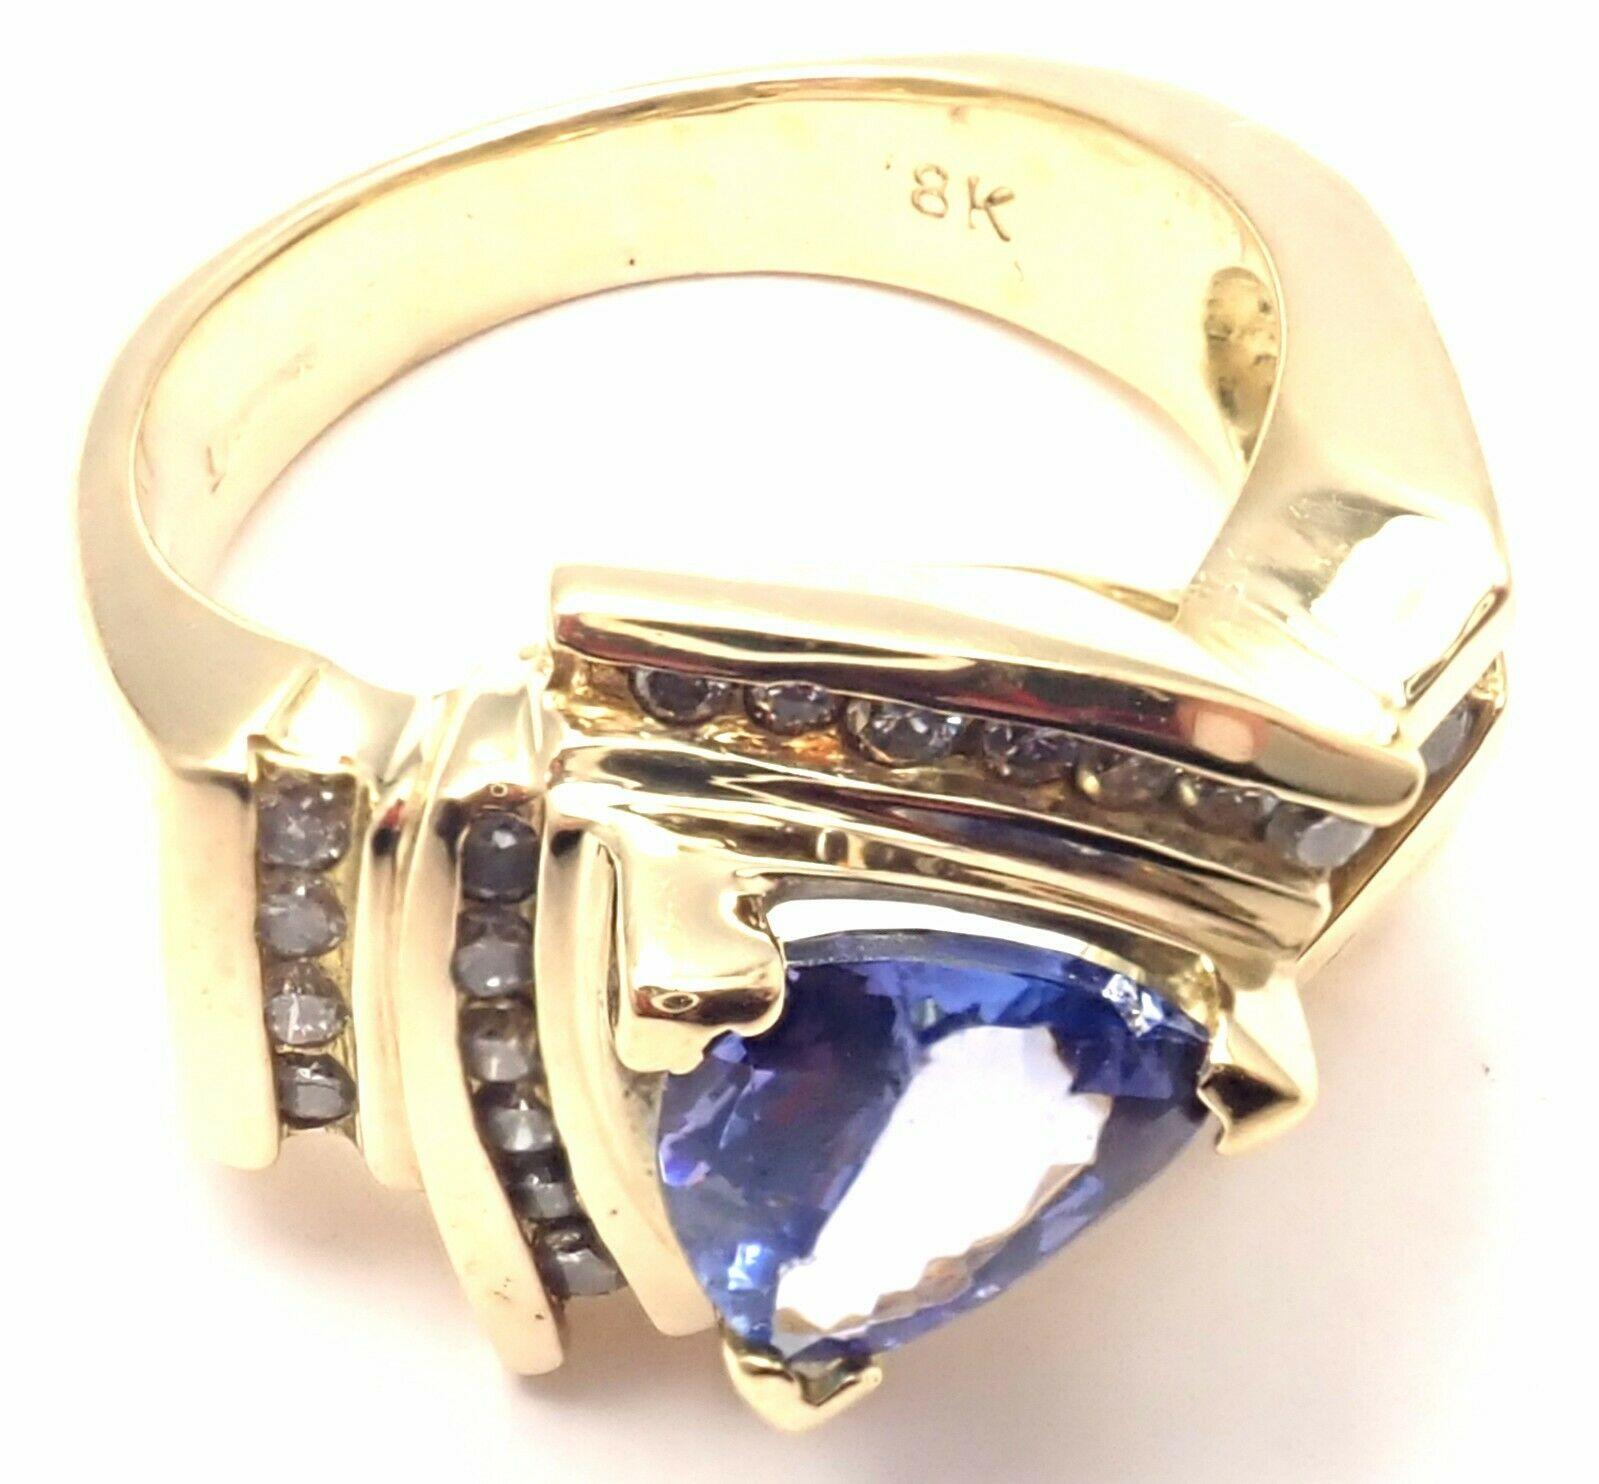 18k White Gold Tanzanite & Diamond Ring by Levian.
With 33 round brilliant cut diamonds total weight approx. 1/2ct
1 Trillion cut Tanzanite approx. 1 1/3ct
Details: 
Size 5.5
Width 14mm
Weight: 9.8 grams
Stamped Hallmarks: LeVian 18k
*Free Shipping